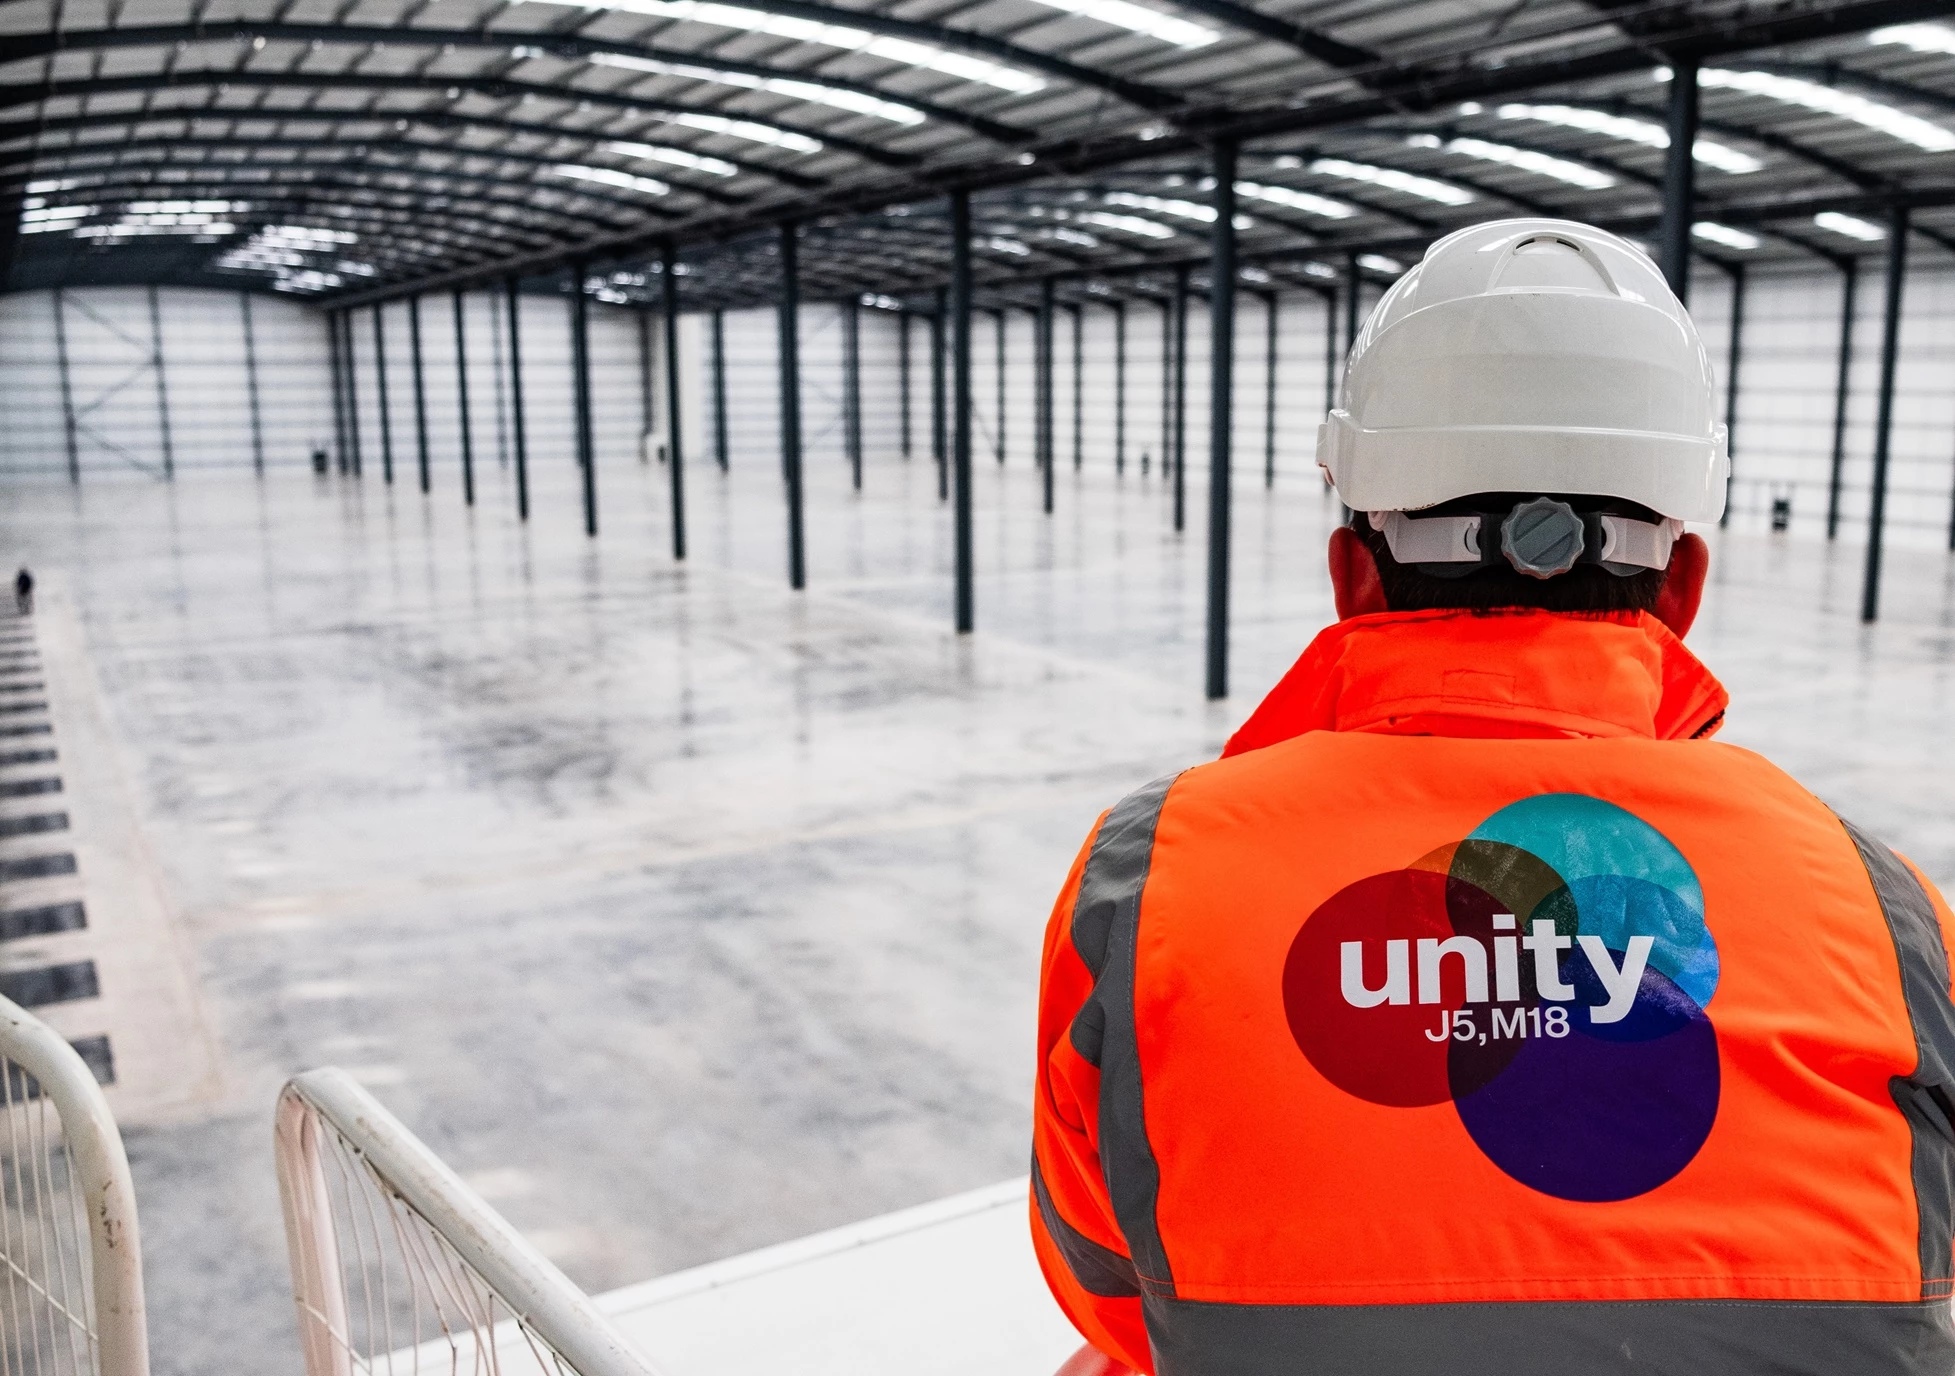 Doncaster 191 occupies a 10-acre (4-ha) plot at Unity in South Yorkshire